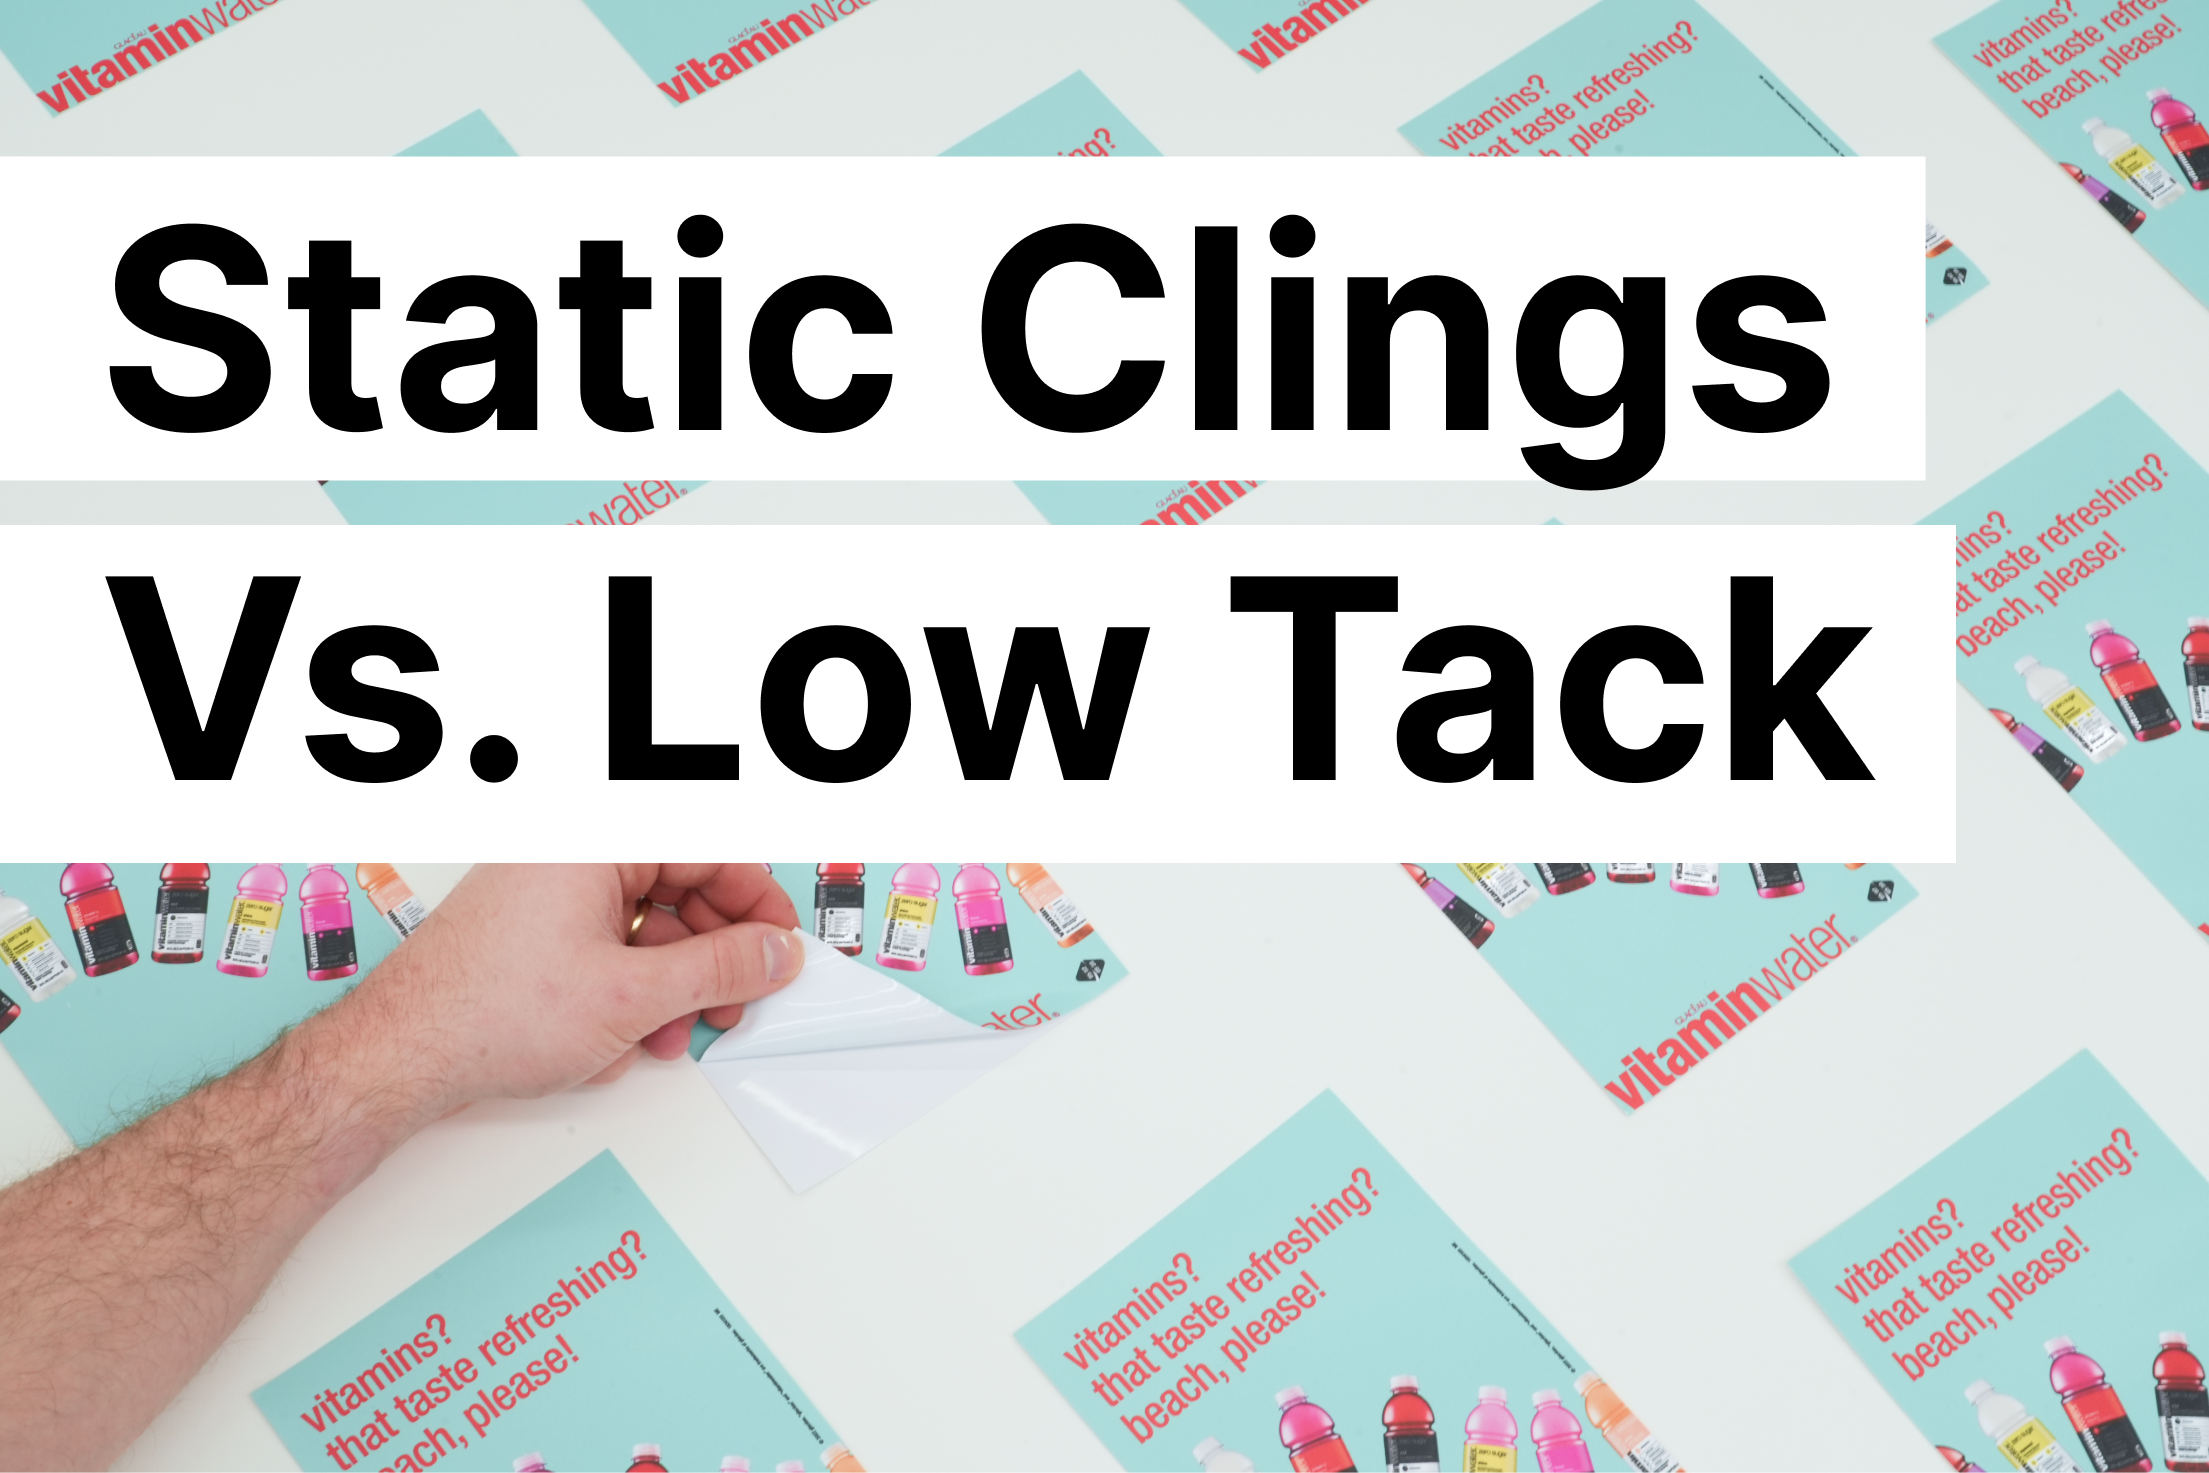 Which Is Better: Static Clings vs Light Adhesive Clings?